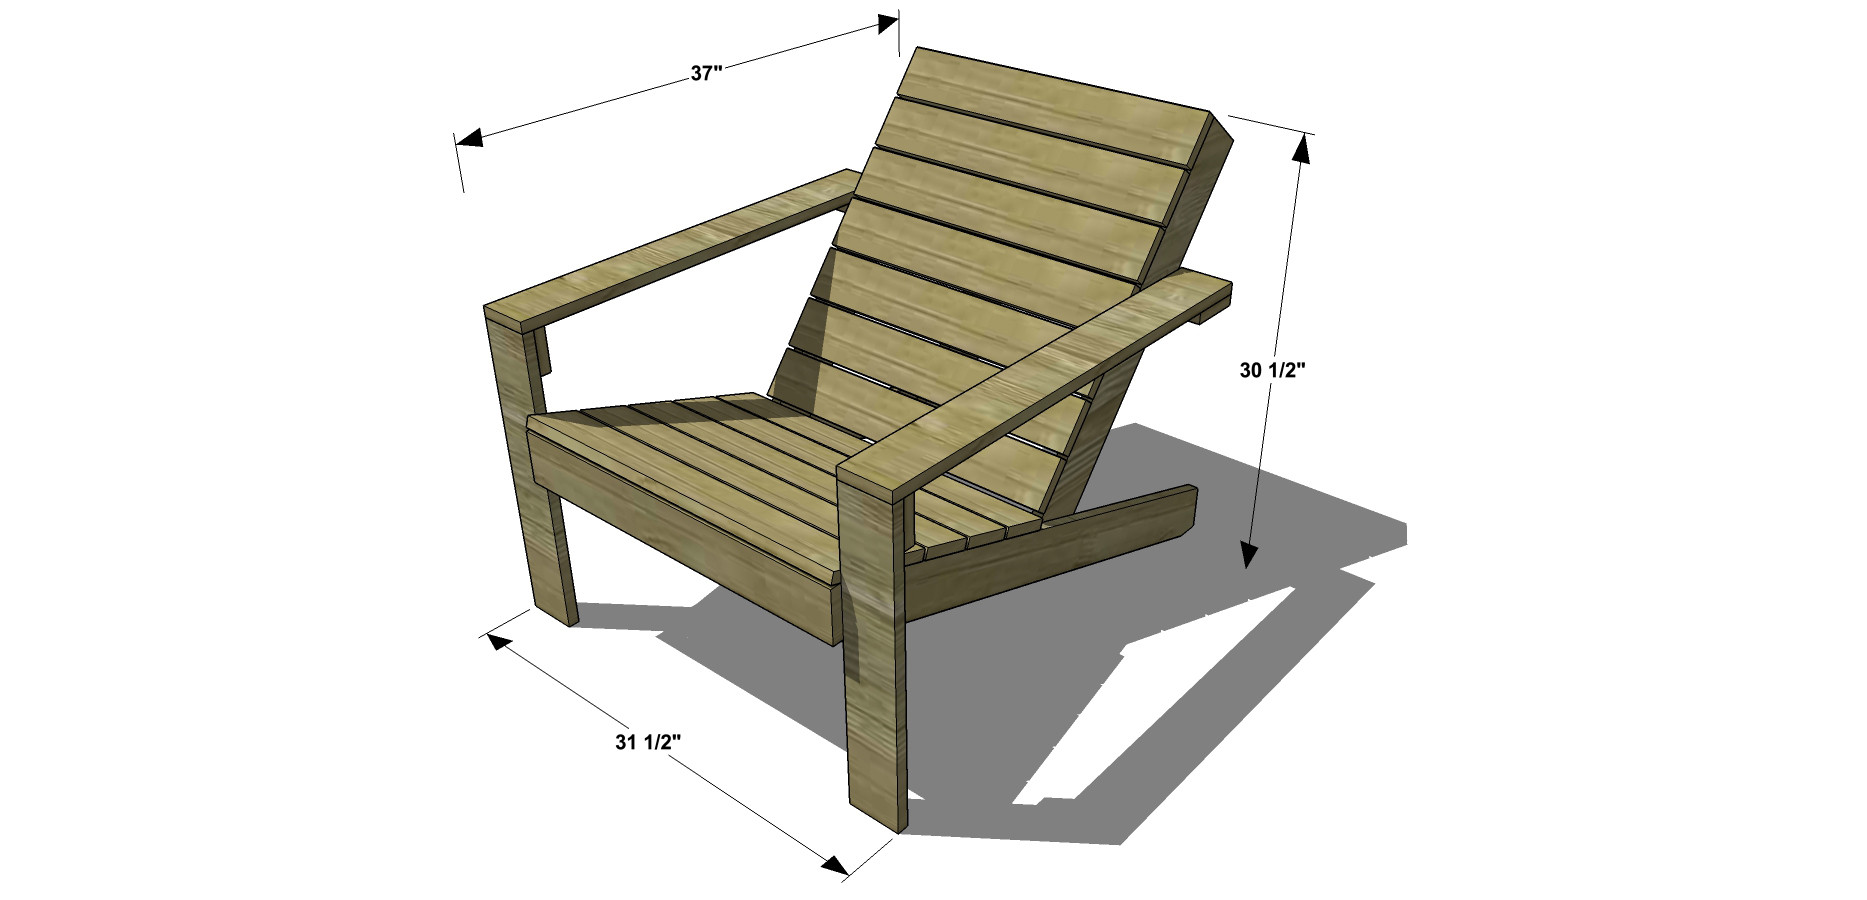 DIY Chair Plans
 Free DIY Furniture Plans How to Build an Outdoor Modern